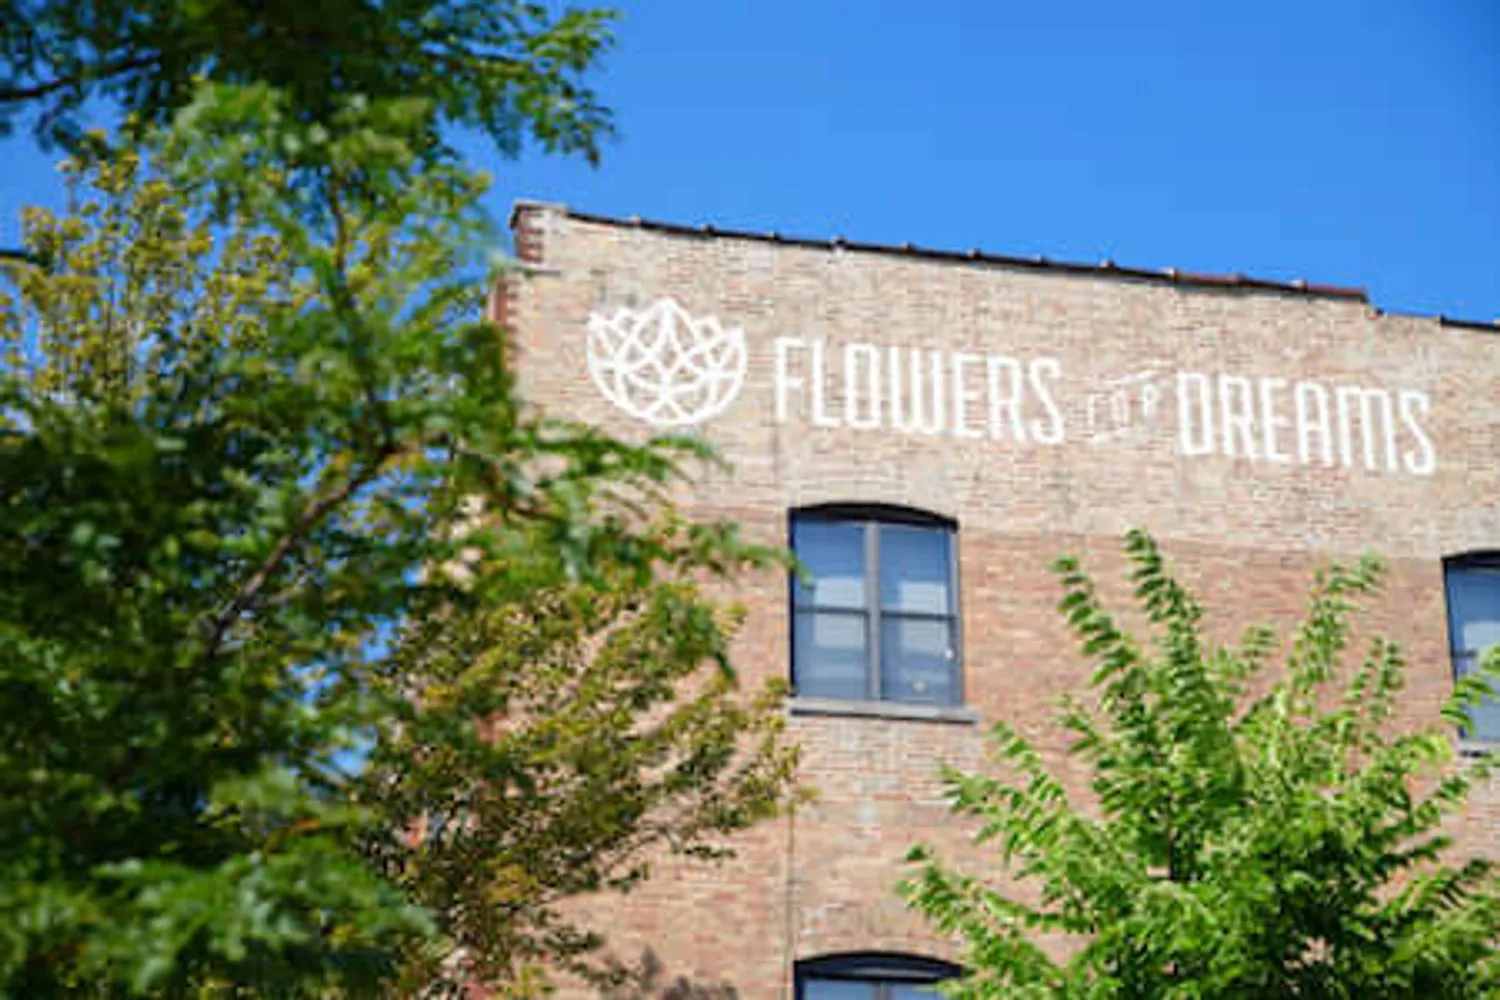 Florists in Chicago, Illinois